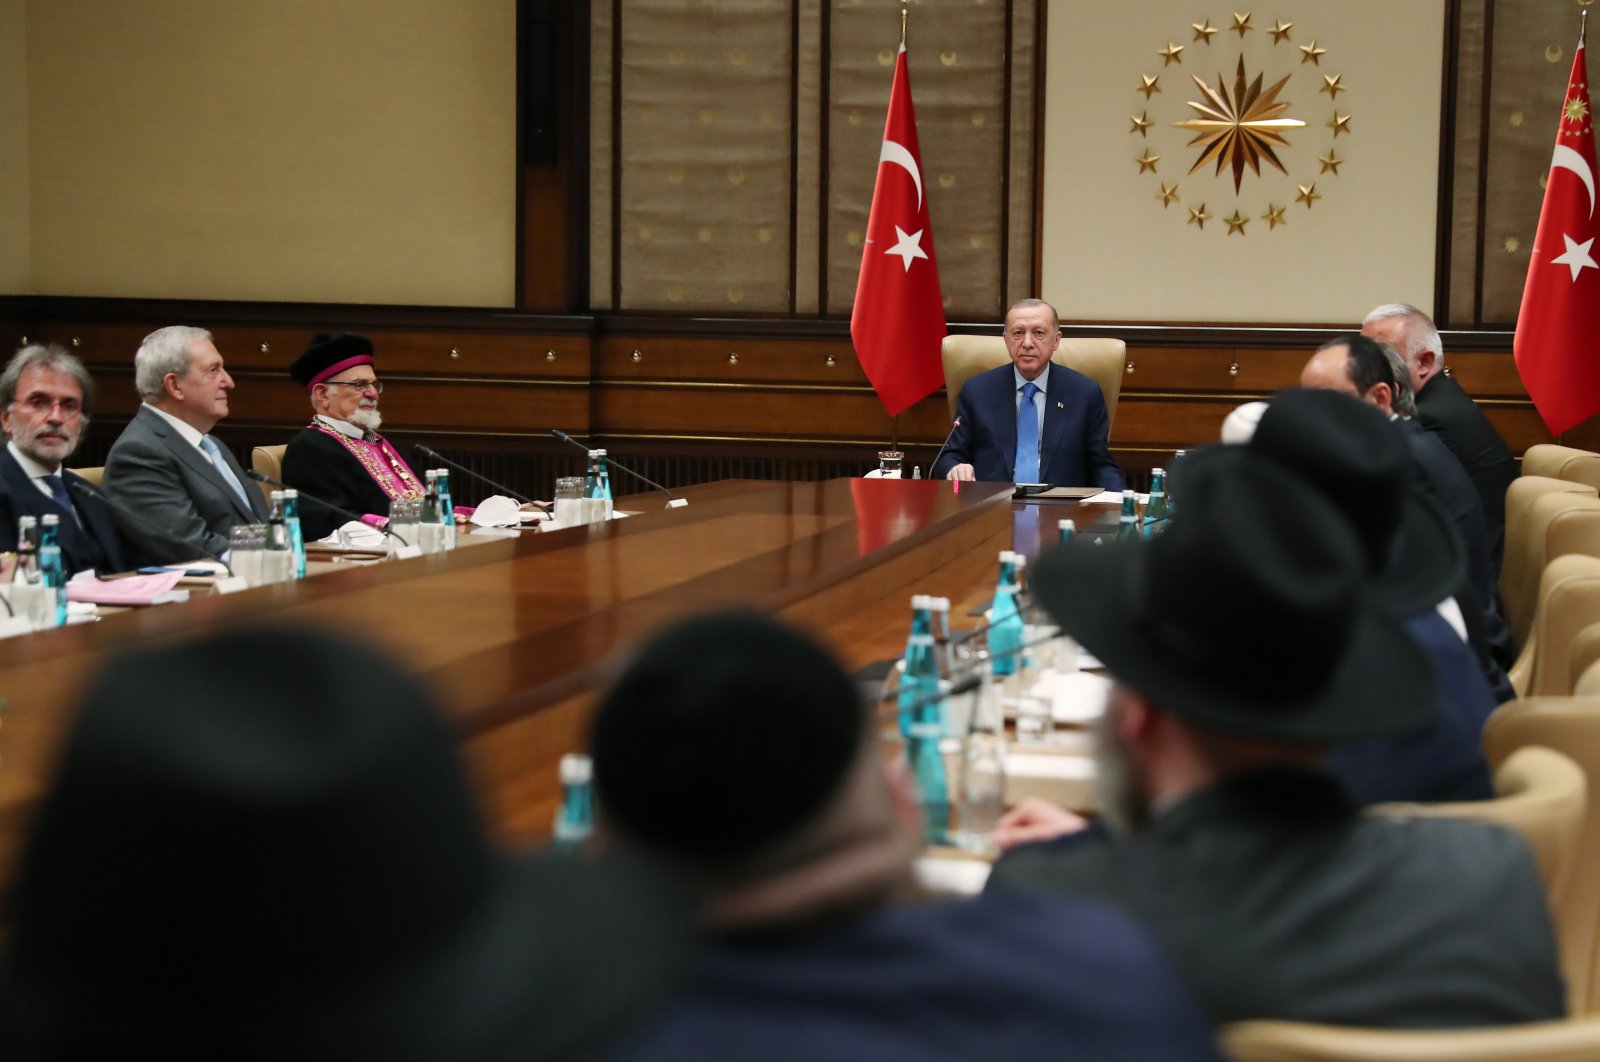 President Recep Tayyip Erdoğan is seen during a meeting with representatives from the Jewish community at the Presidential Complex in Ankara, Turkey, Dec. 22, 2021. (AA Photo)